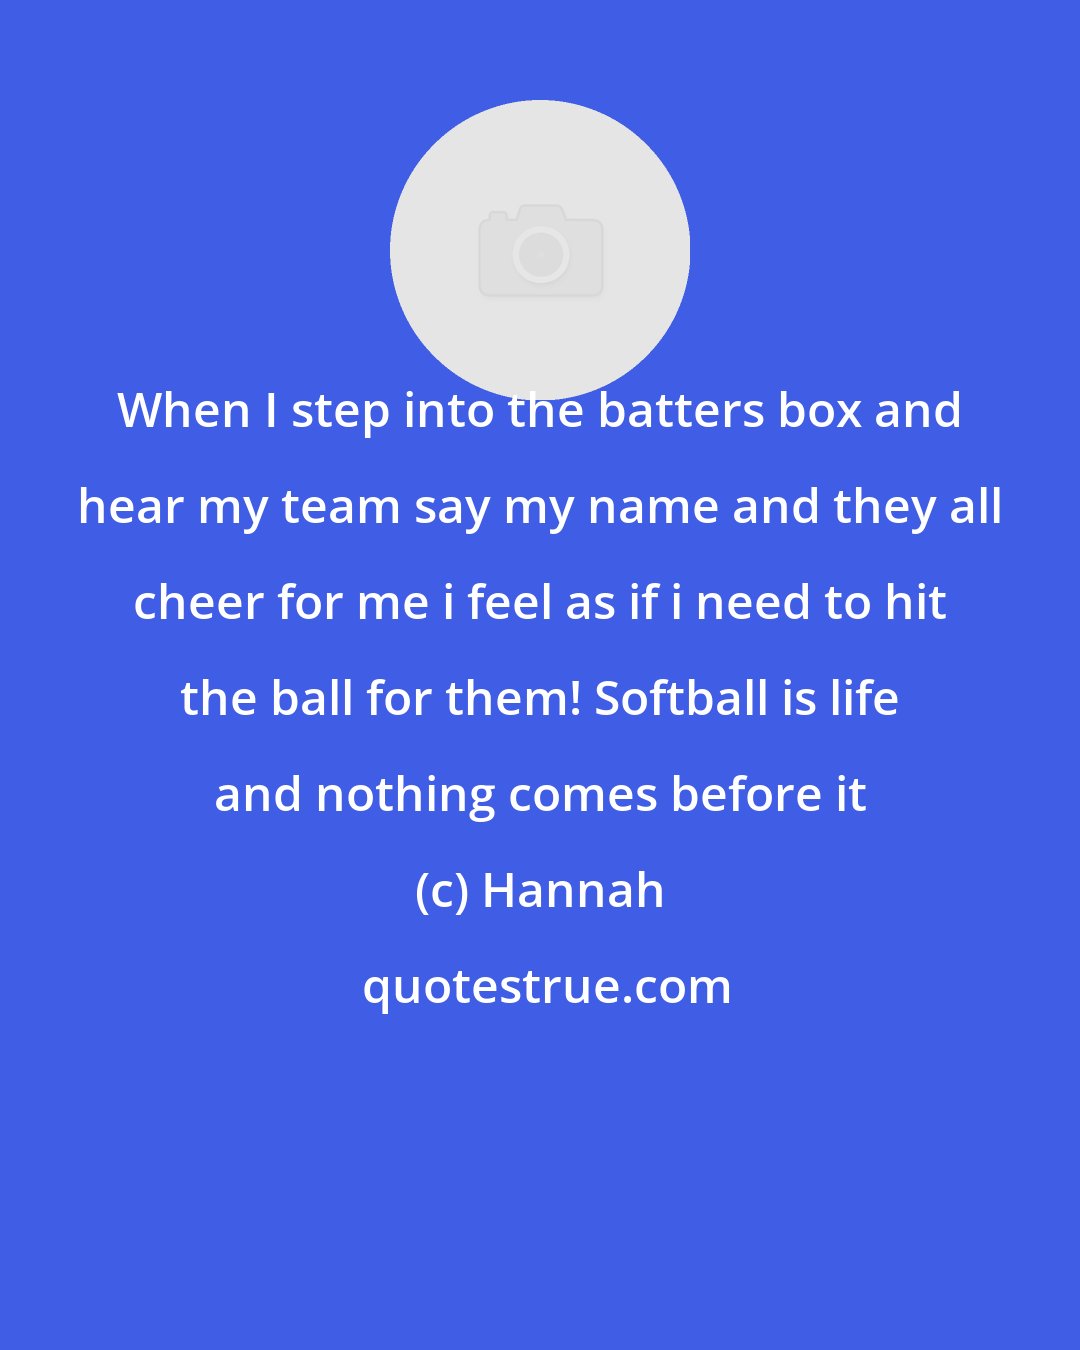 Hannah: When I step into the batters box and hear my team say my name and they all cheer for me i feel as if i need to hit the ball for them! Softball is life and nothing comes before it